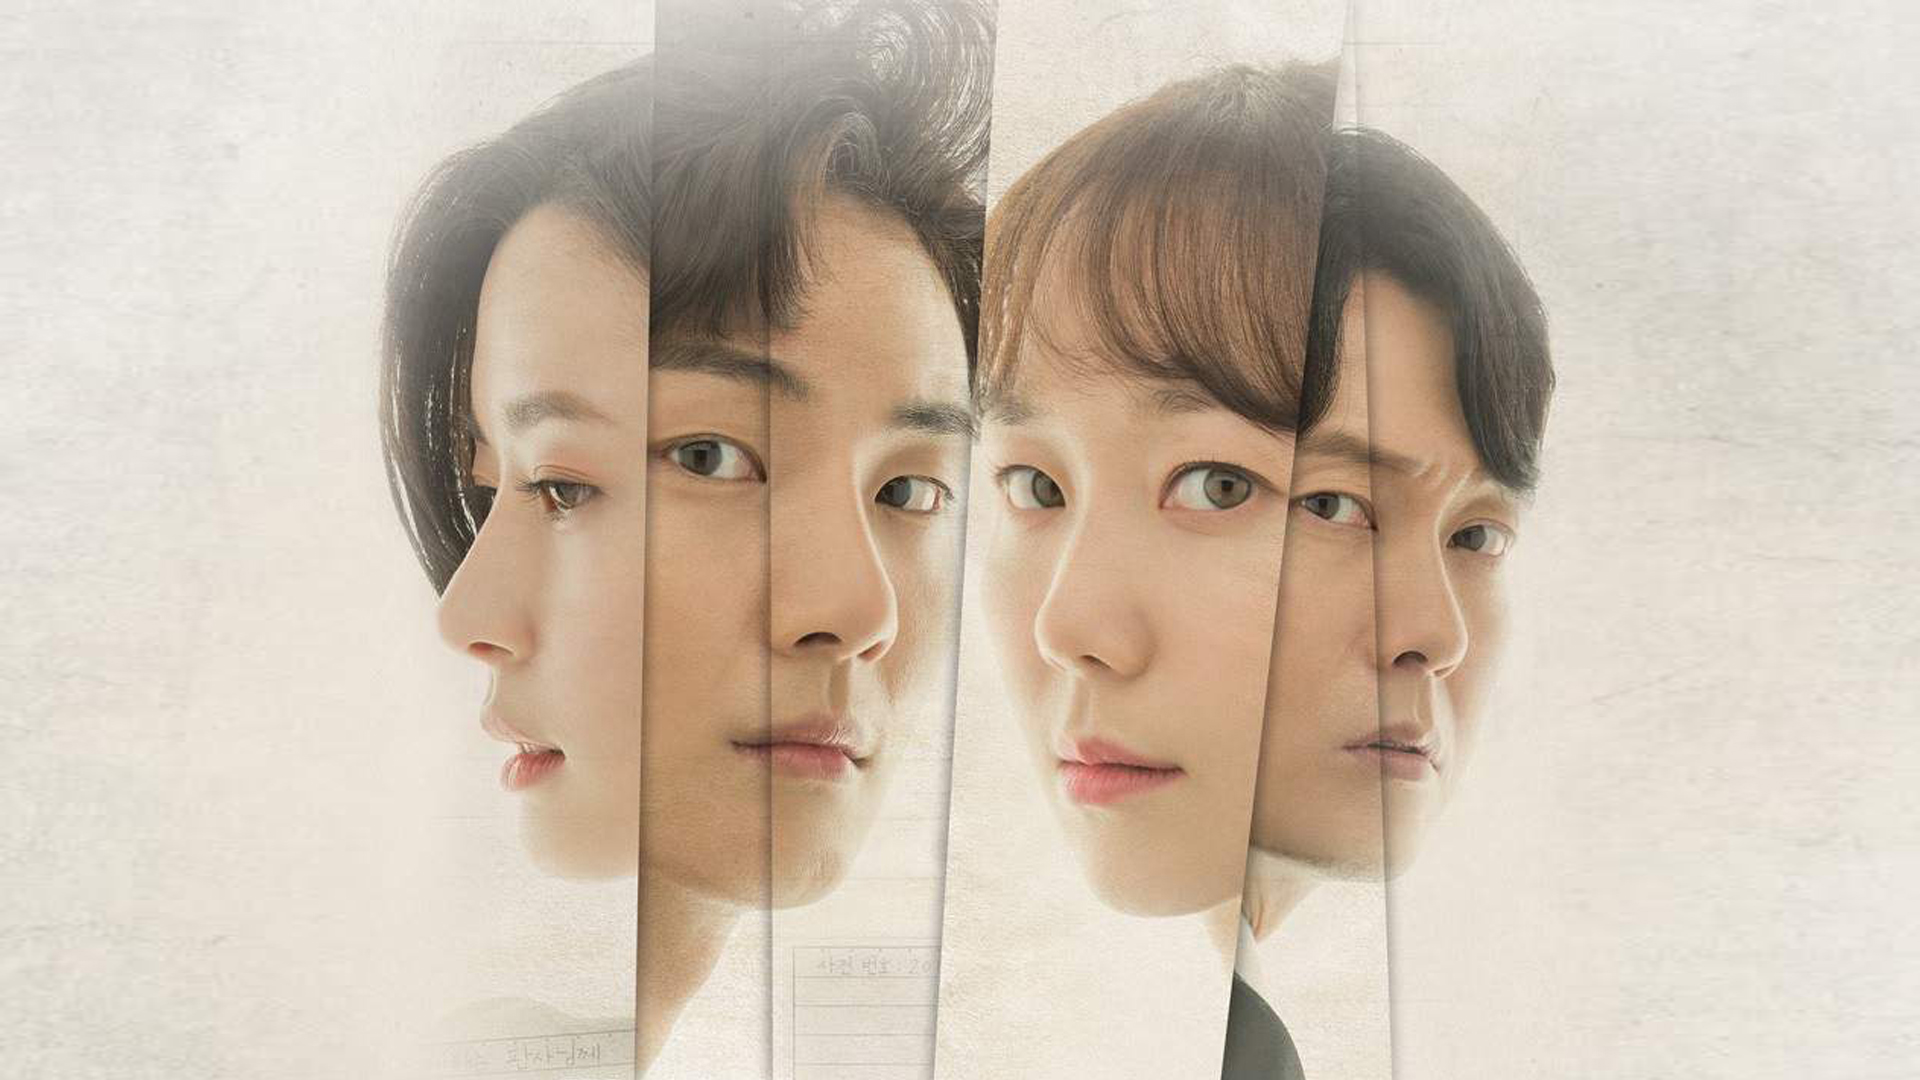 Good Ol’ Review: Yoon Shi Yoon is Masterful in Emotionally Gripping and Pitch Perfect “Your Honor”